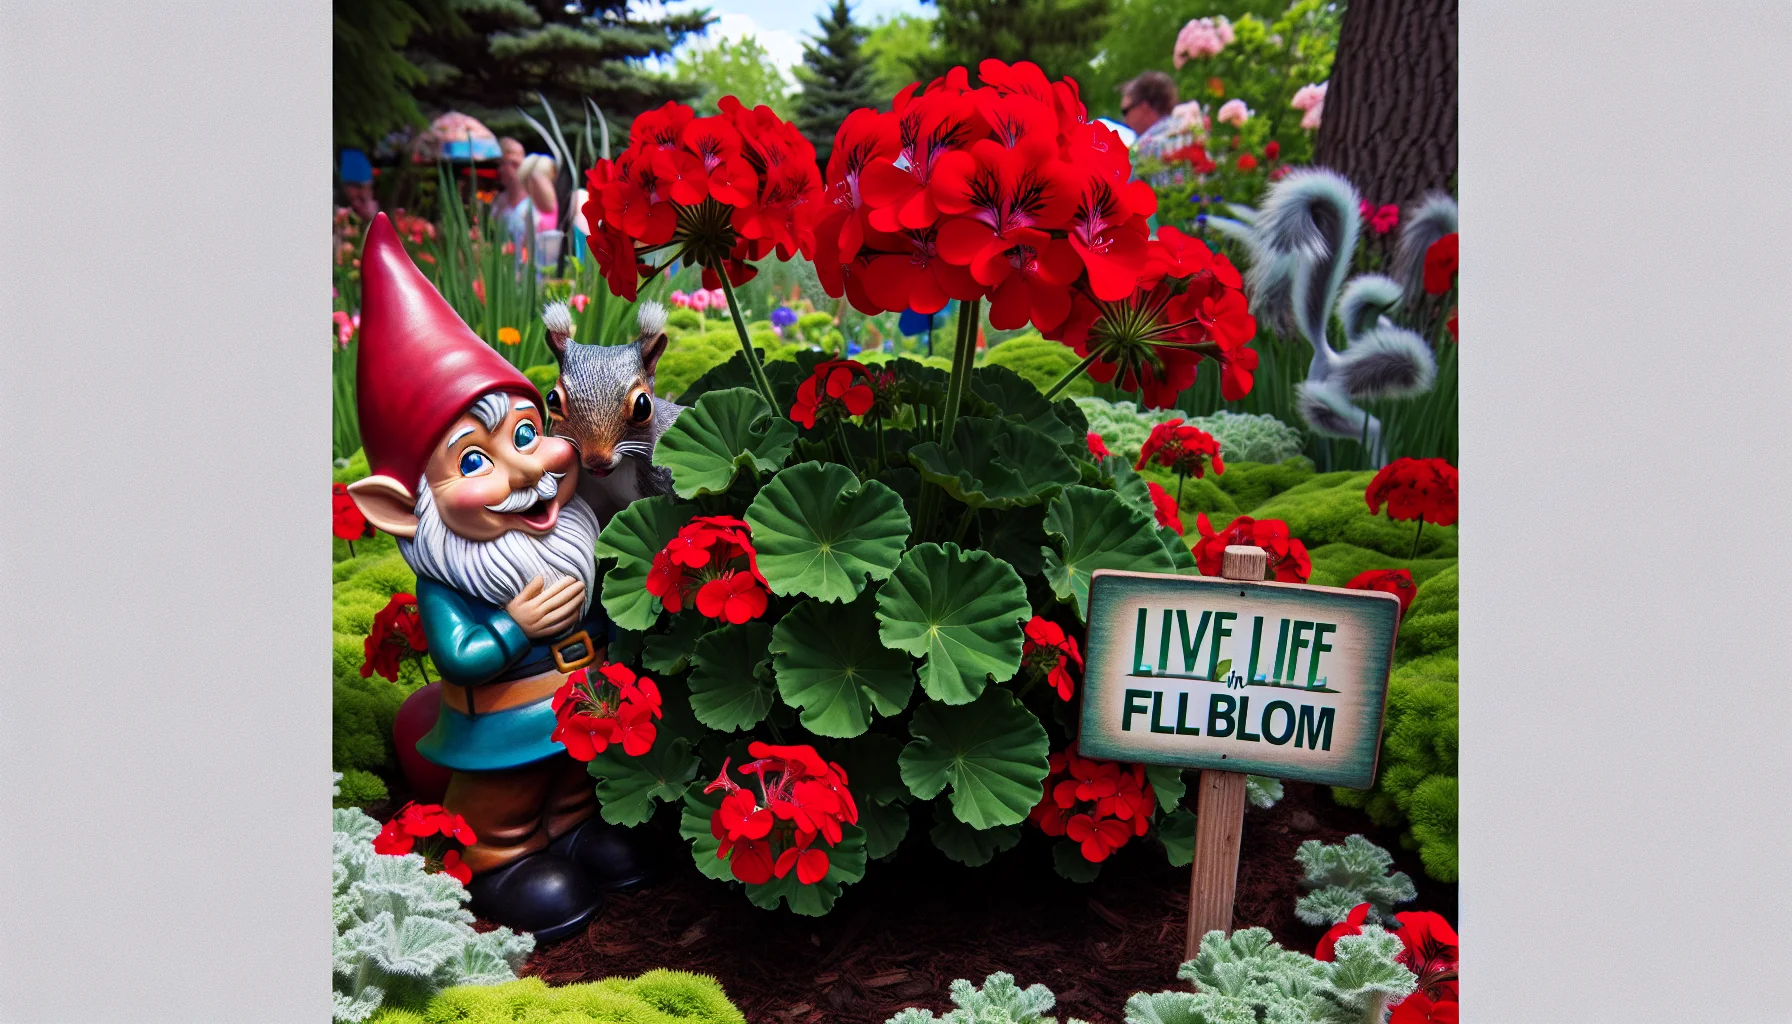 A visually appealing and humor-filled scene centered around a vibrant and flourishing geranium bush. The flowers are intensely red, their leaves a rich green. A garden gnome of Hispanic descent, with a playful smile, is posed as if whispering secrets to the geranium, while a curious squirrel of unusual sky-blue fur color peers from behind the bush. A signboard near the bush humorously reads, 'Live Life in Full Bloom'. This entire scene is set against the backdrop of a verdant garden, demonstrating the joys and wonders of gardening in a fun and engaging manner.